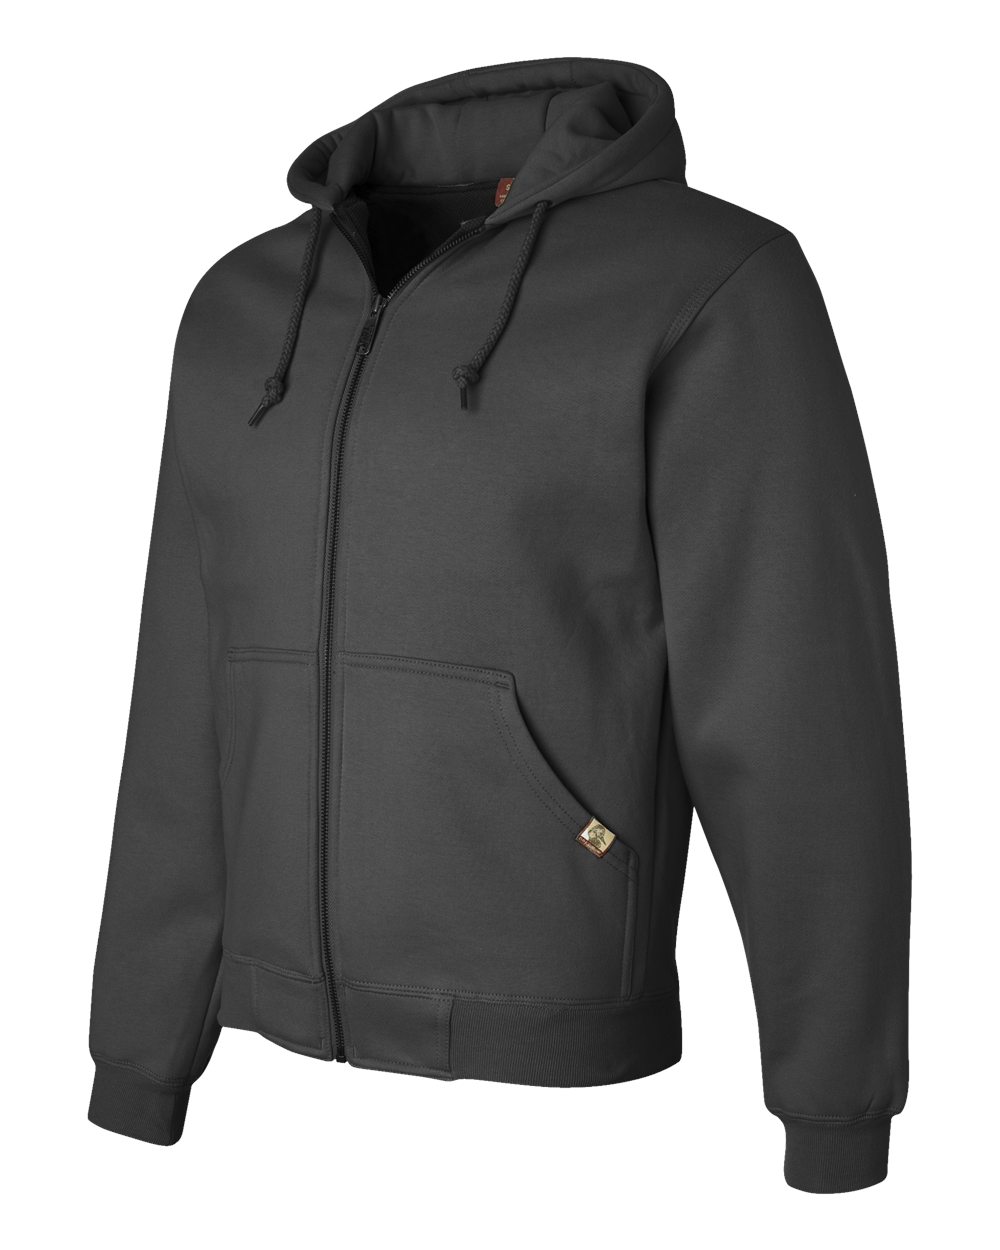 DRI DUCK 7033T - Power Fleece Jacket with Thermal Lining Tall Sizes